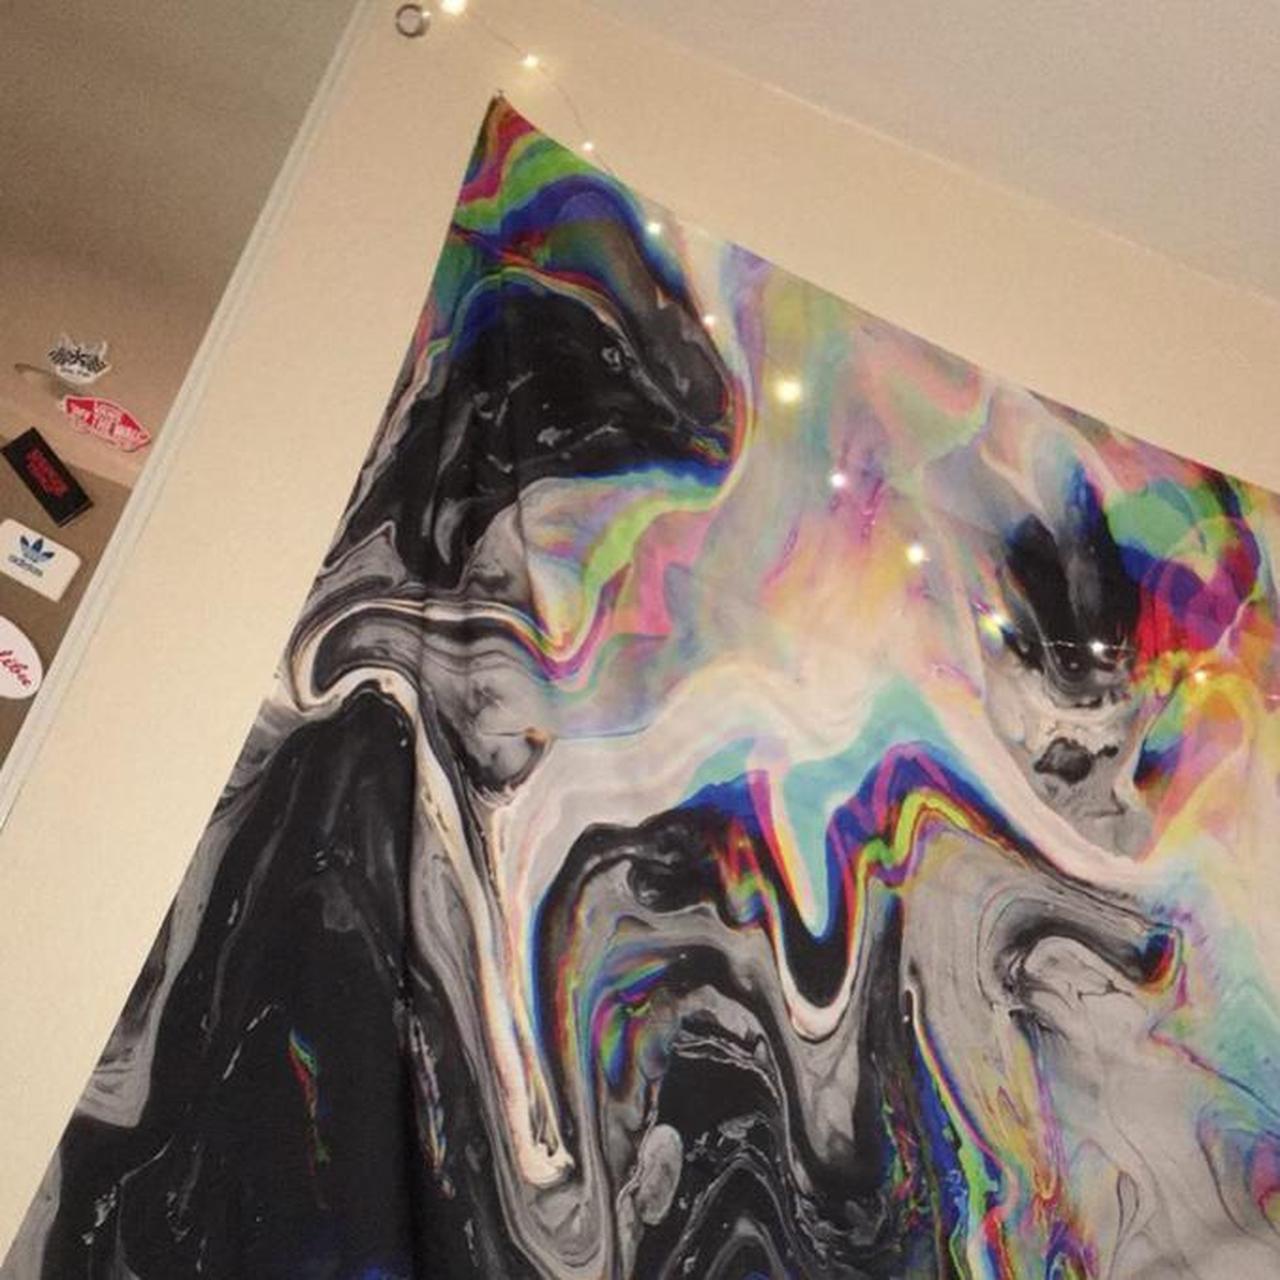 Product Image 1 - 💿 psychedelic tapestry 💿

-super awesome